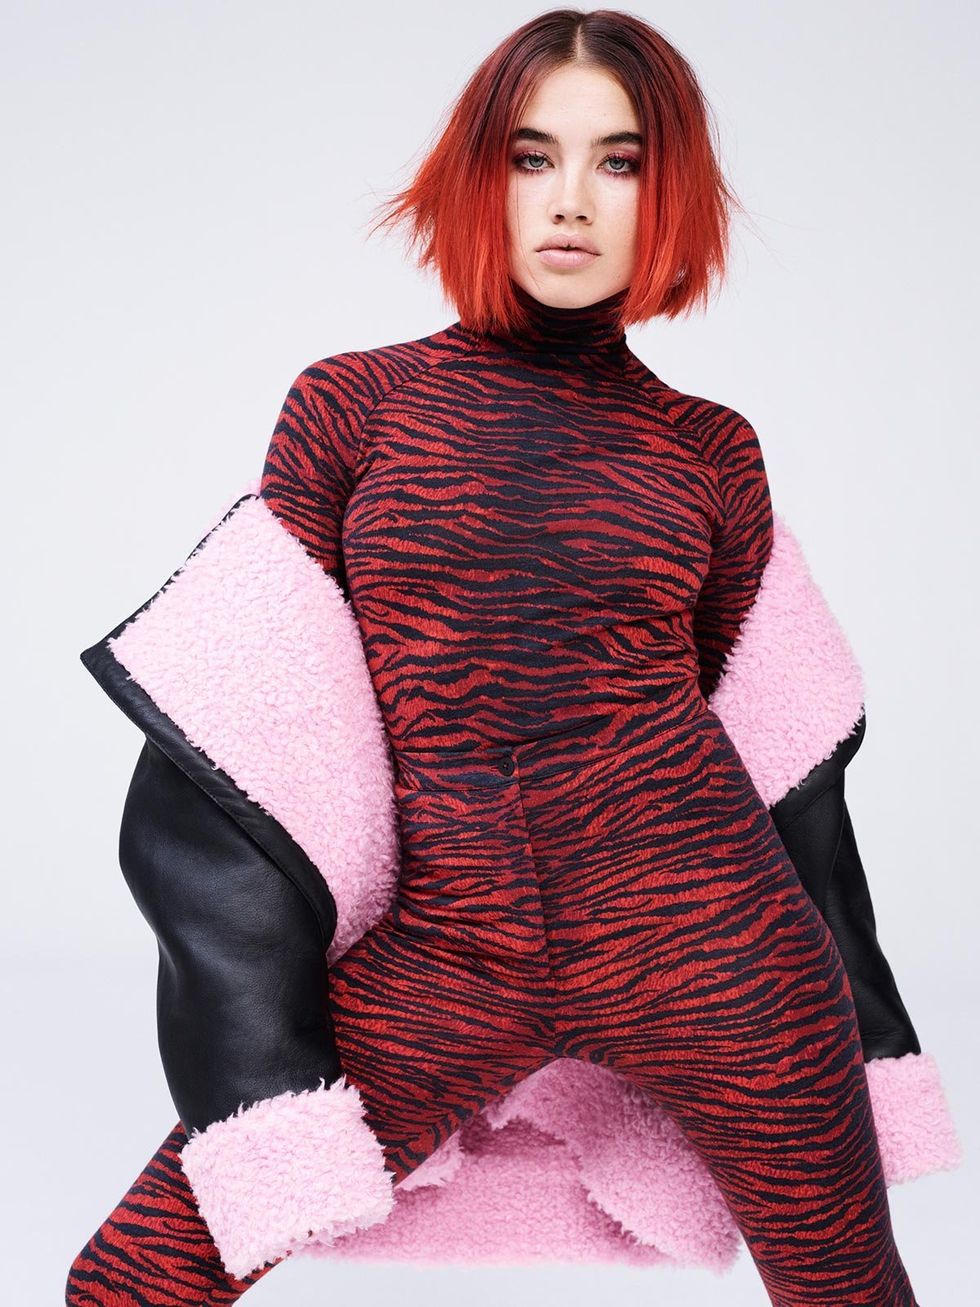 Lip, Sleeve, Shoulder, Red, Fashion model, Costume accessory, Fashion, Red hair, Magenta, Model, 